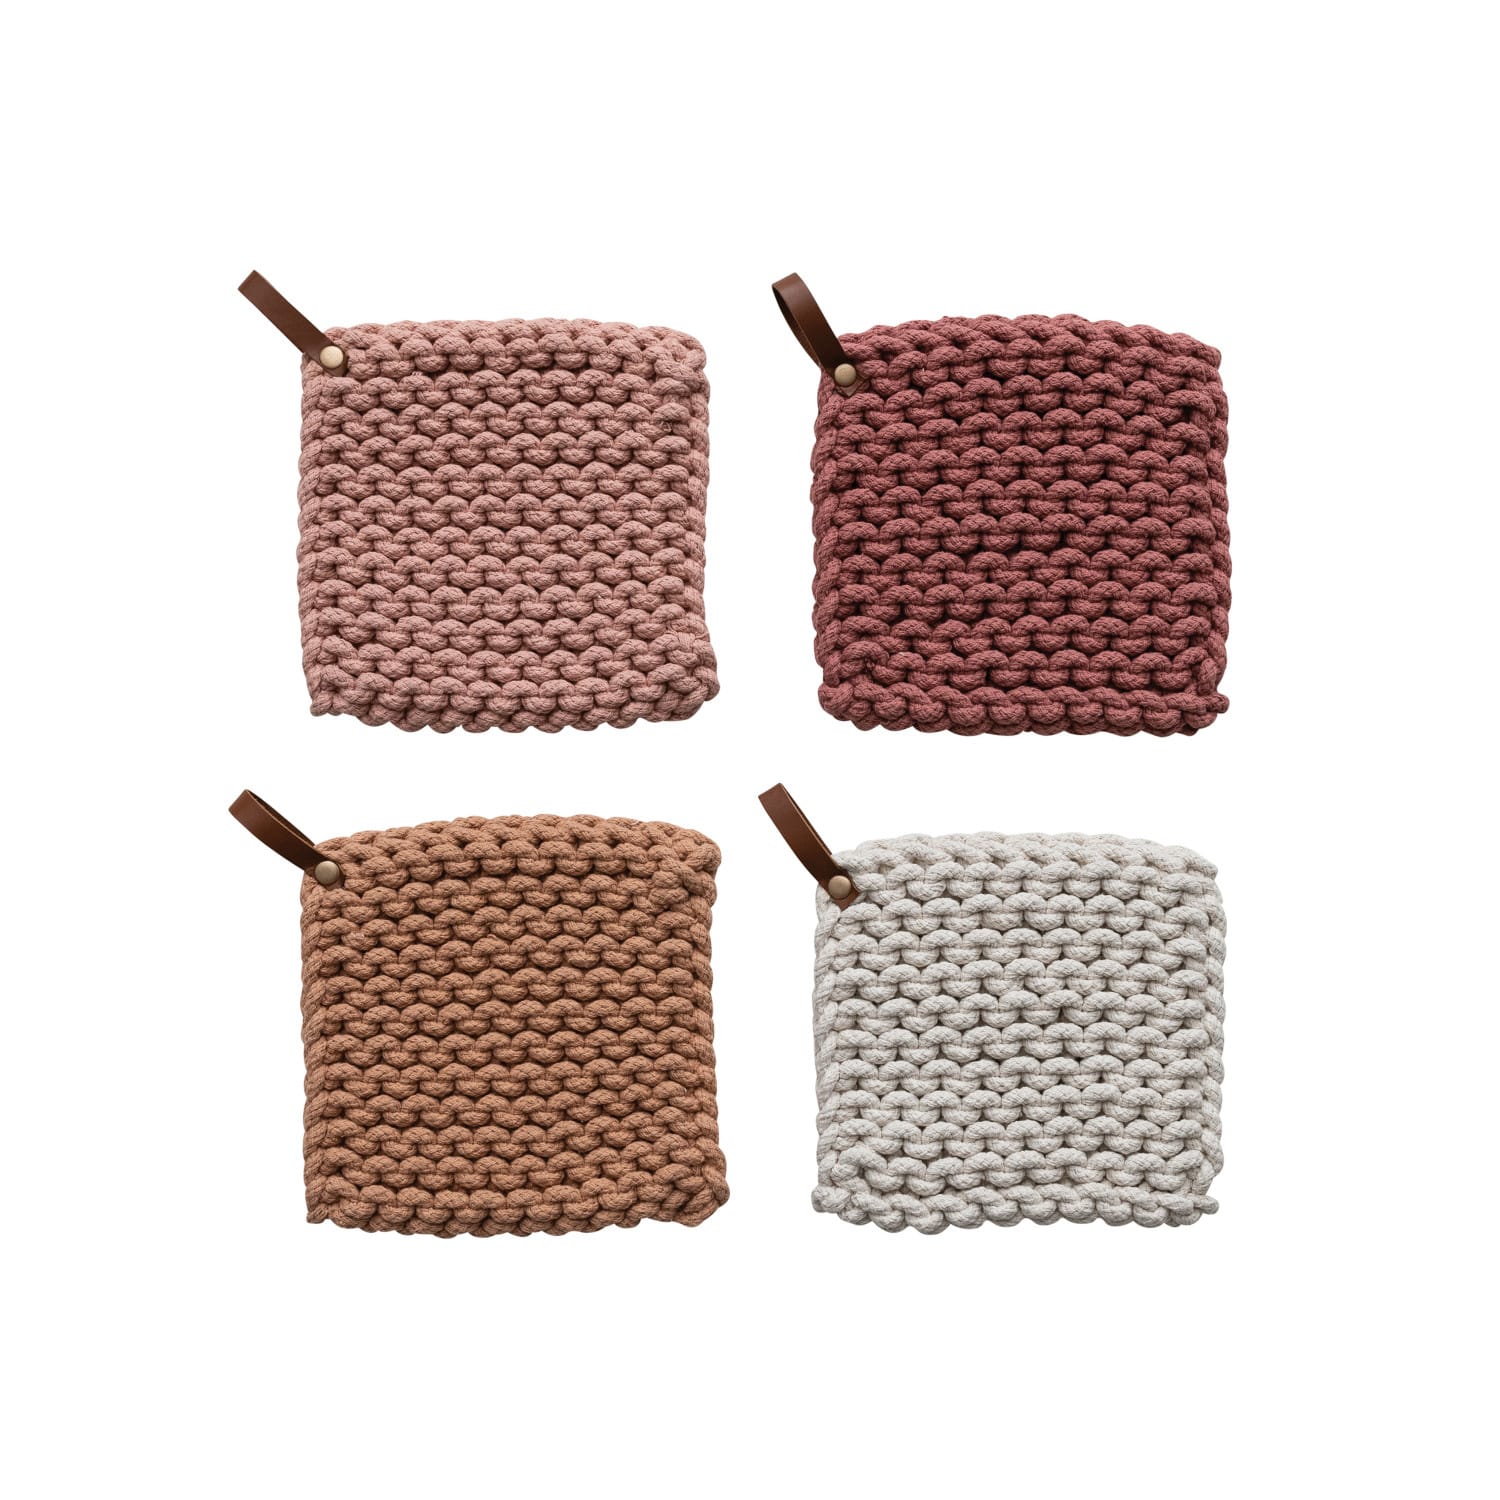 Solid Color Cotton Crocheted Pot Holder with Leather Loop Handle Set